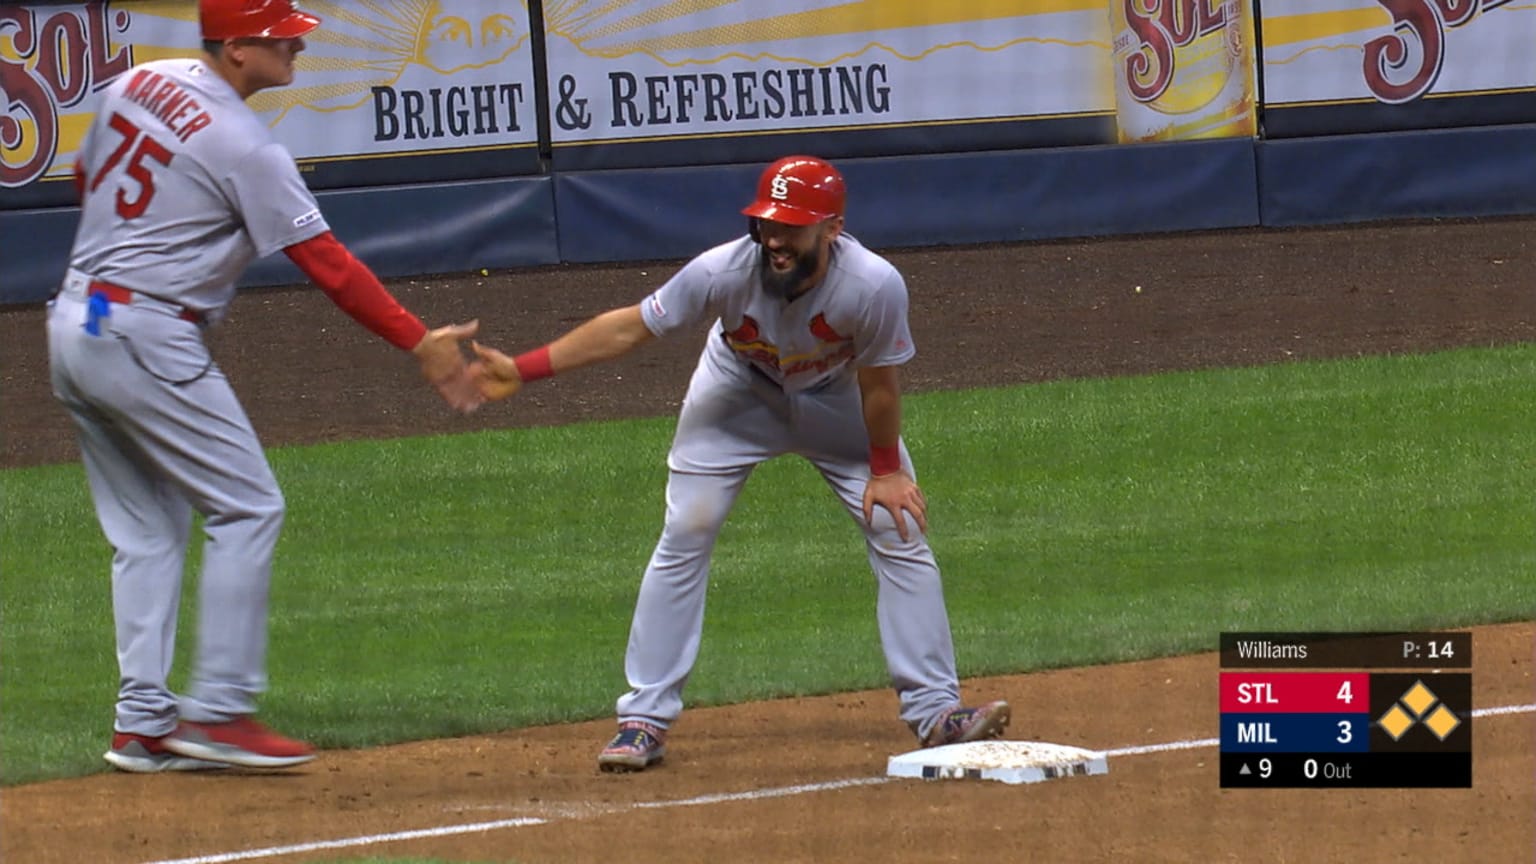 Bader&#39;s RBI double to center | 08/28/2019 | St. Louis Cardinals